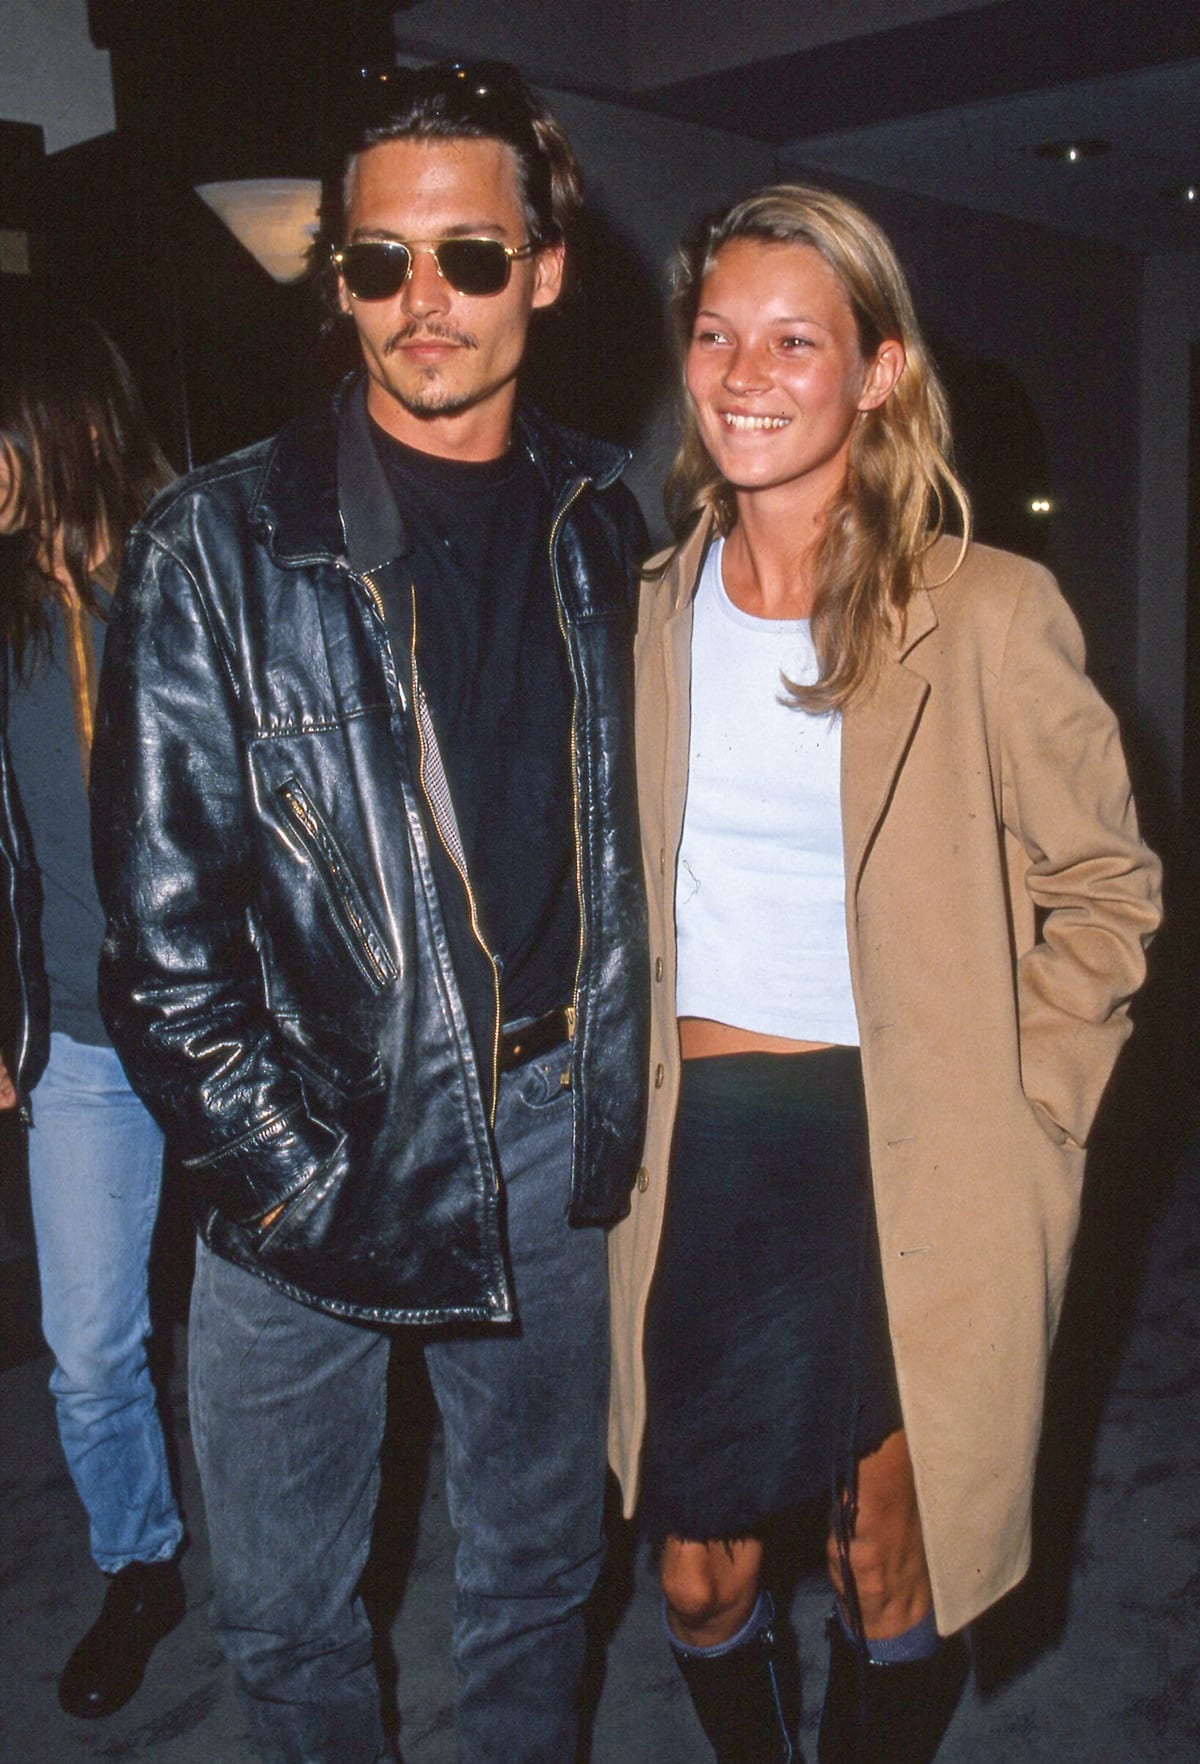 Kate Moss first met Johnny Depp in a New York restaurant, and they dated from 1994 to 1998